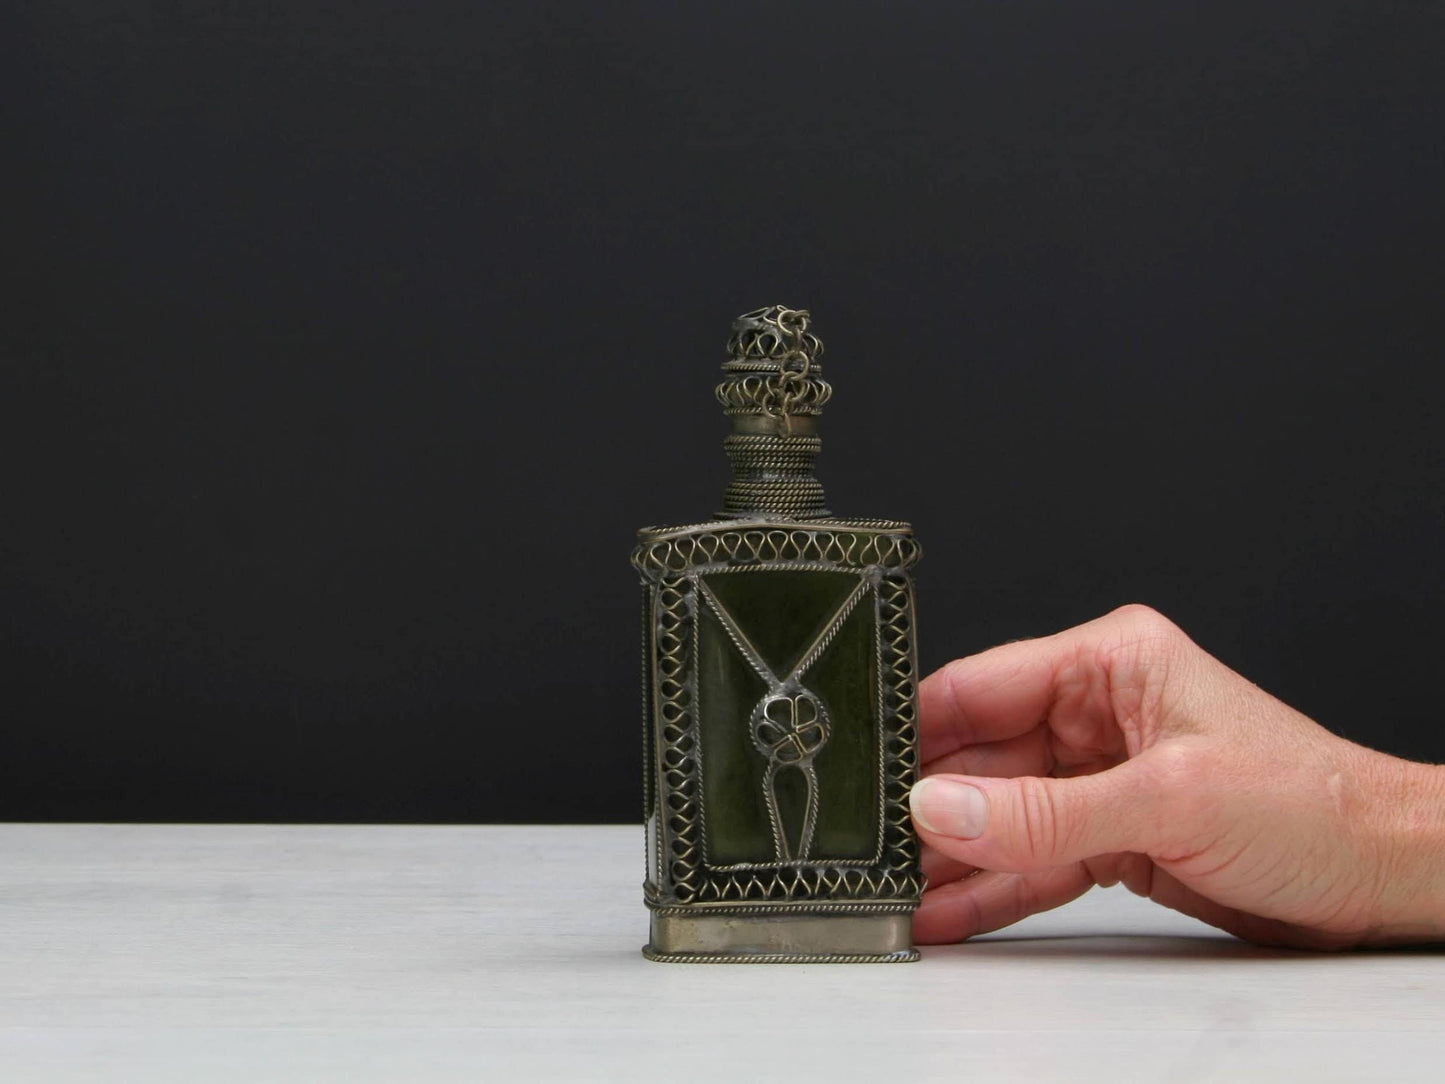 French Antique , Snuff Bottle | Shabby Chic Vanity-Antique Bottle | Bathroom Decor , Unique Finds and Great Deals